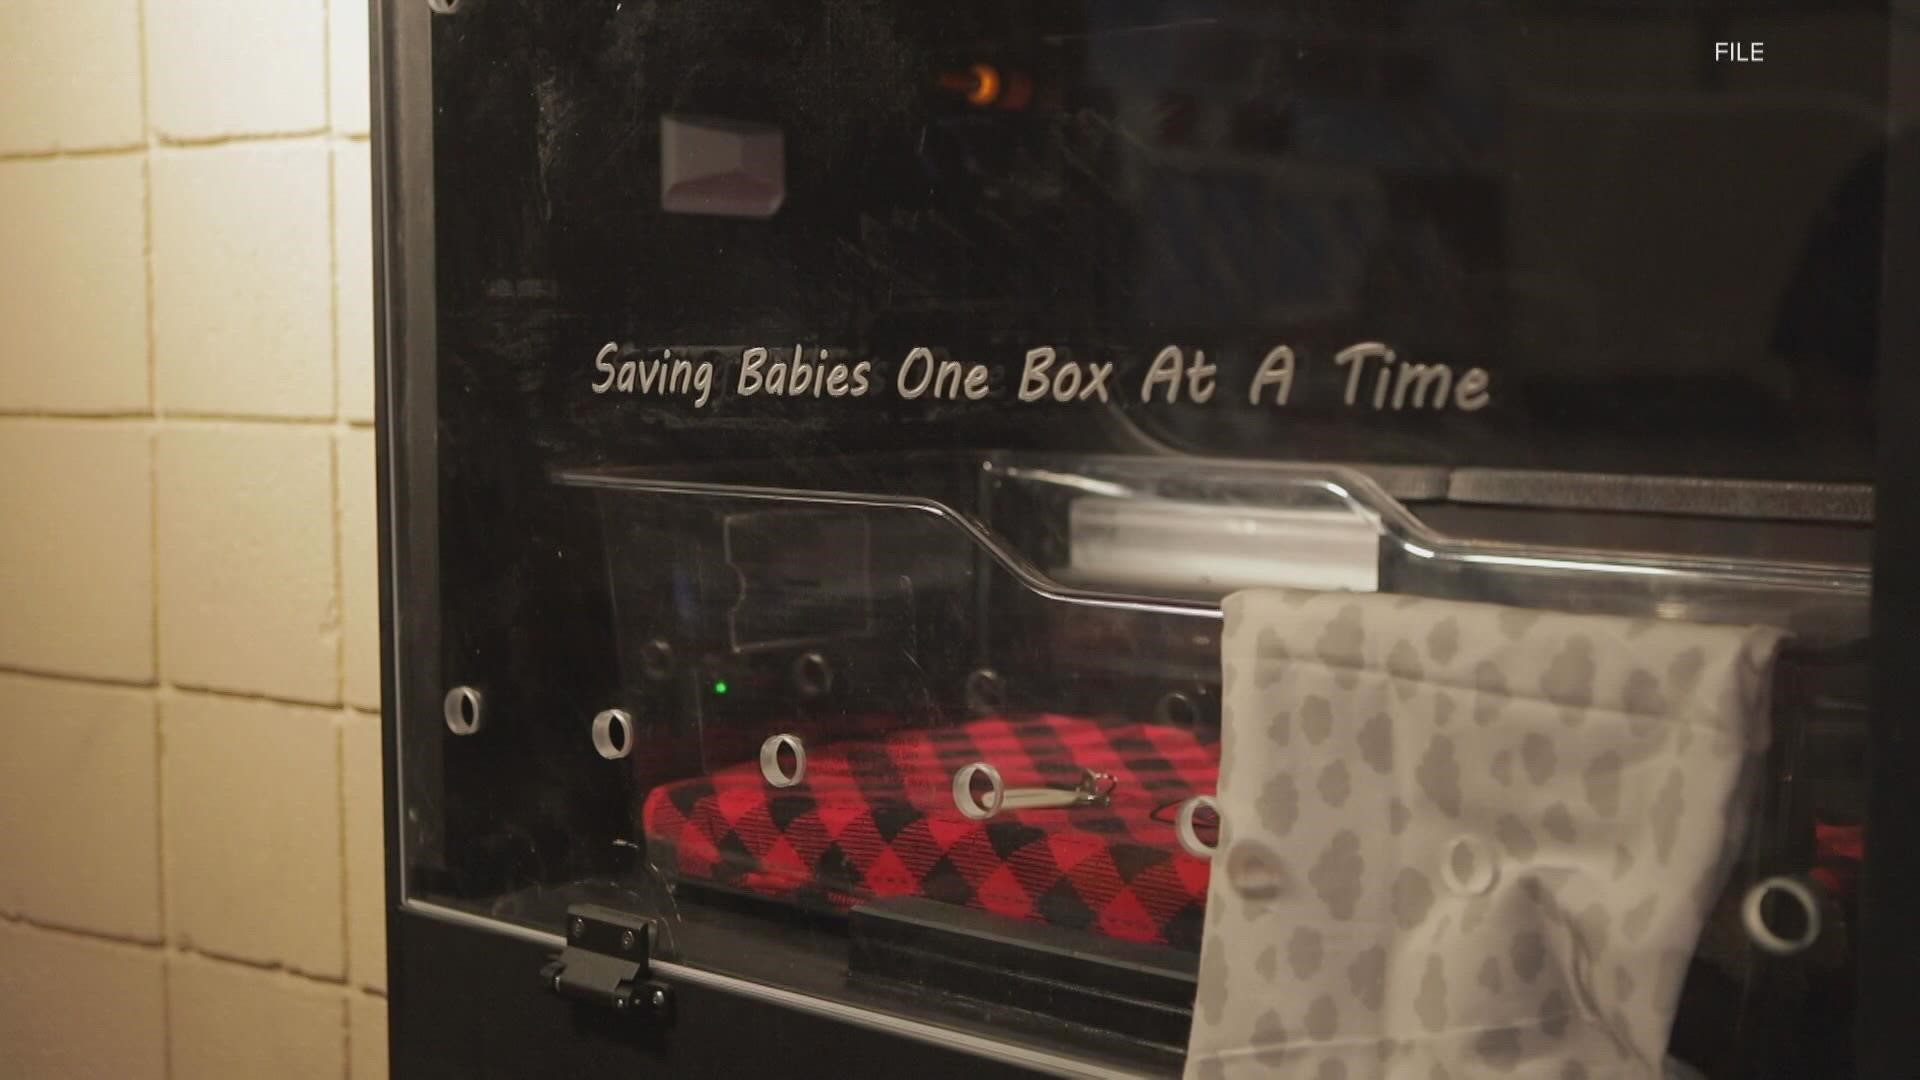 In the last 6 years, 19 babies have been surrendered in Safe Haven Baby Boxes and more than 120 have been handed over through the organization's 24/7 hotline.